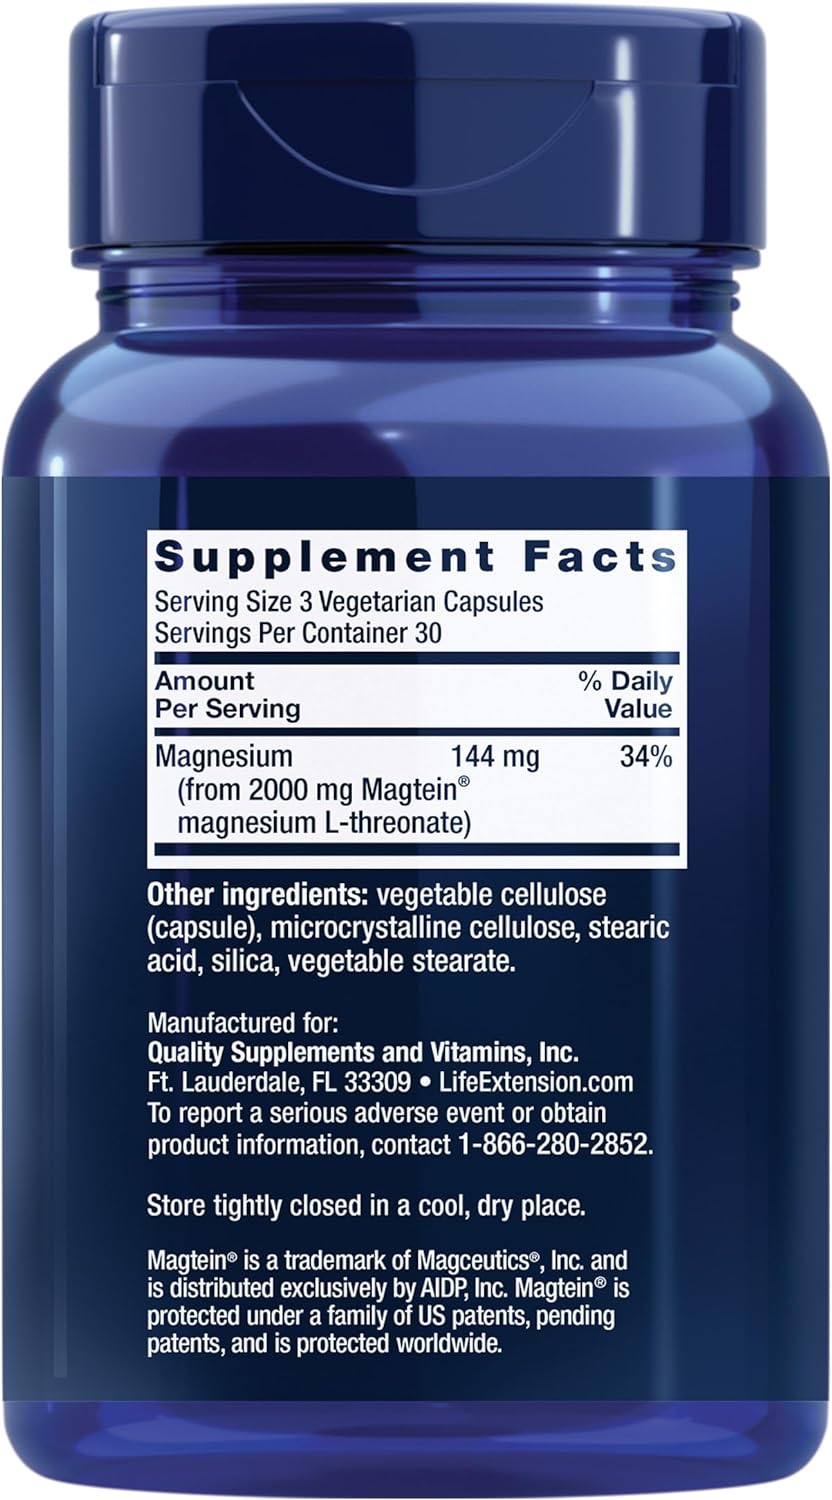 Life Extension Neuro-mag Magnesium L-threonate and Vitamin D3 Supplement Bundle for Brain, Bone and Immune Health